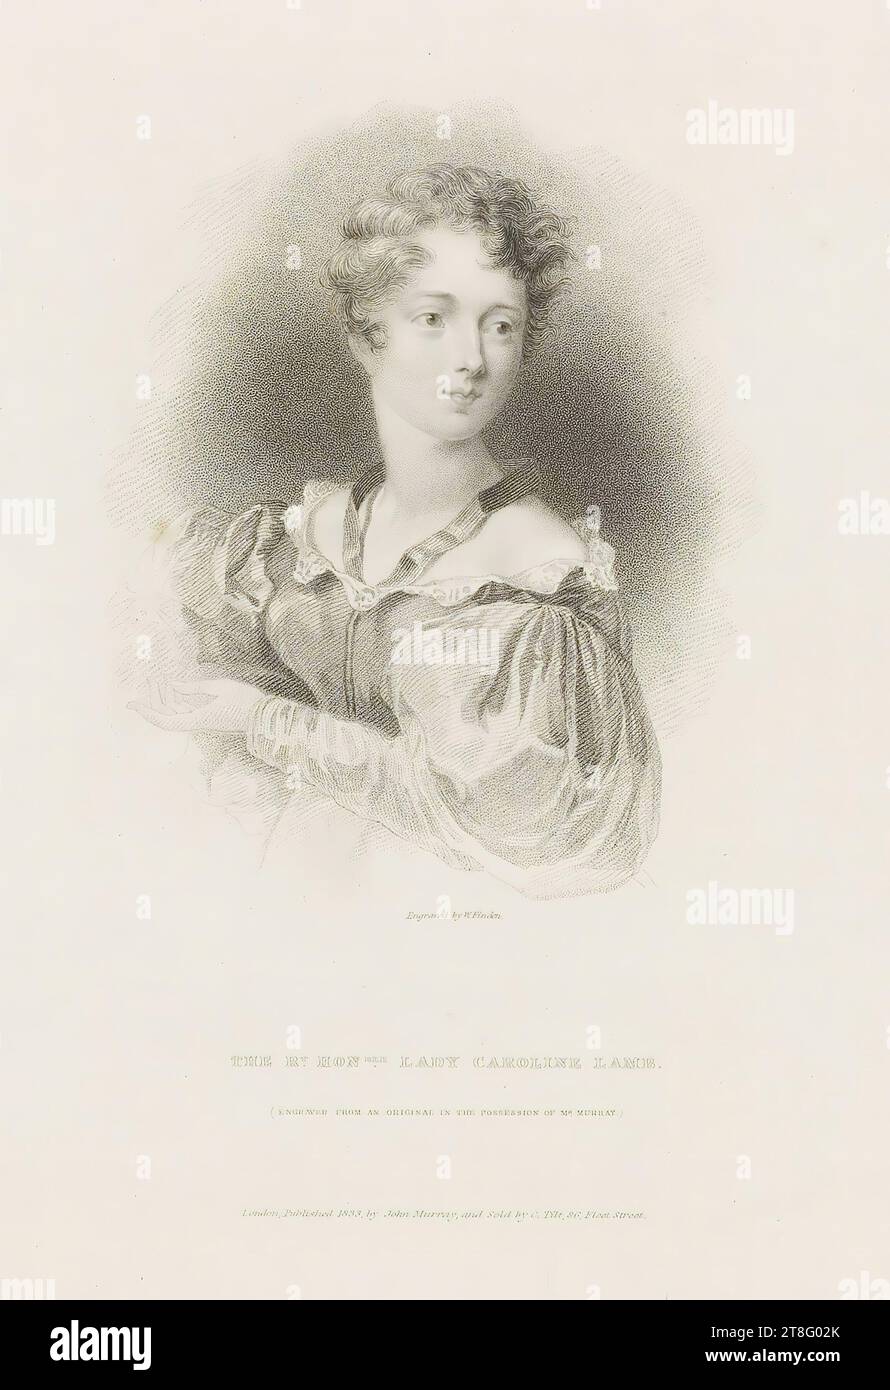 Engraved by W. Finden. THE R.T HON.BLE LADY CAROLINE LAMB. (ENGRAVED FROM AN ORIGINAL IN THE POSSESSION OF MR. MURRAY). London, Published 1833, By John Murray, and Sold by C. Tilt, 86, Fleet Street Stock Photo